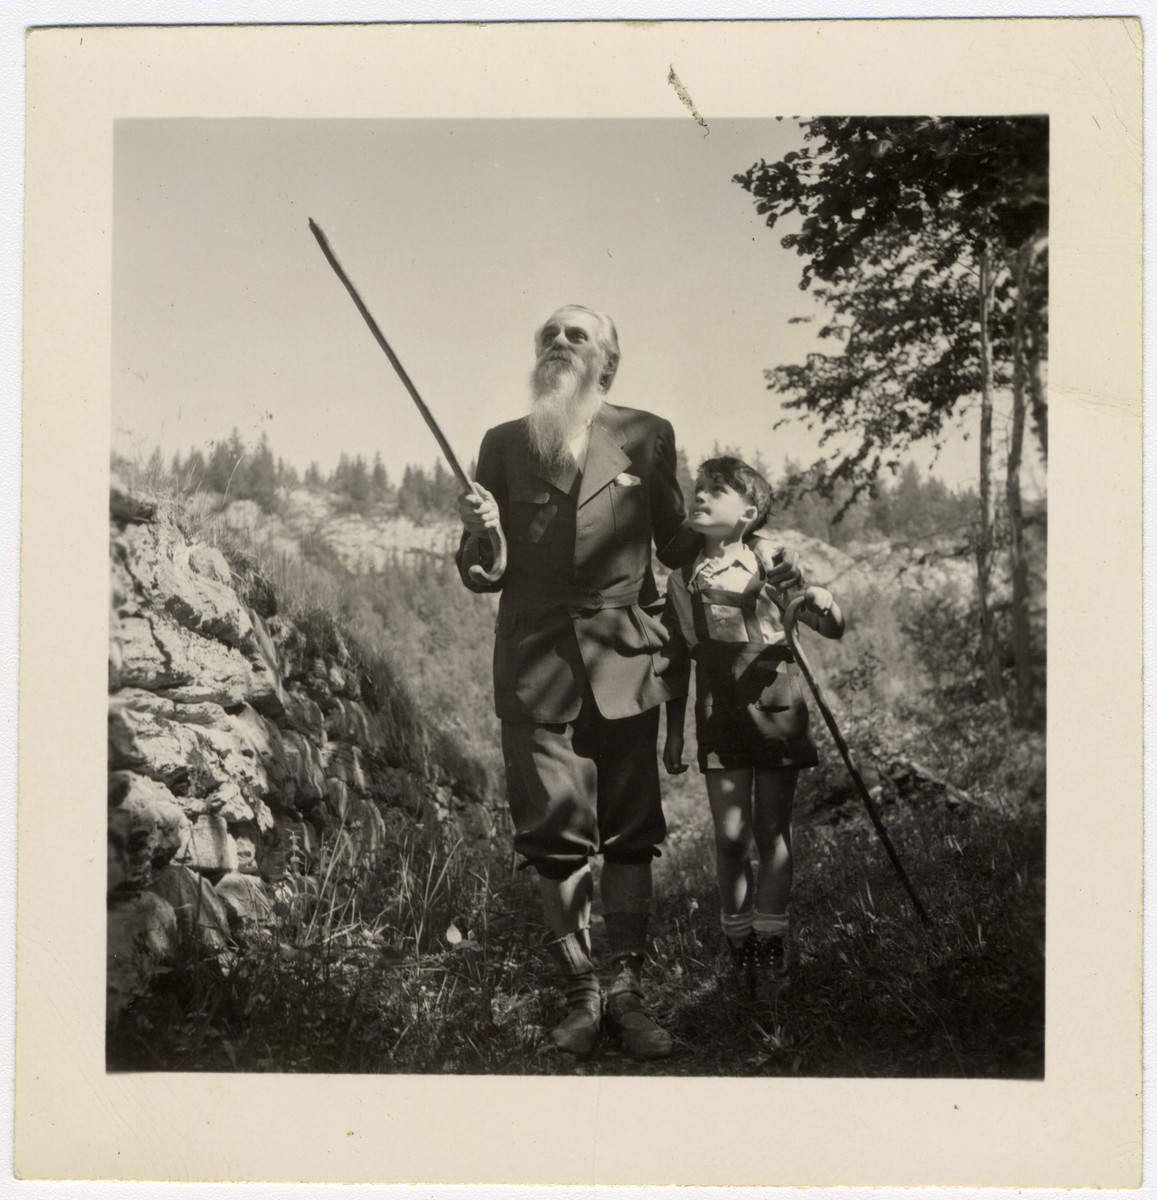 Dr. Geheb, the principal of the private school, École d'Humanité near Bern, goes for a walk with a young student.

Ruth Schwarzhaupt attended this school for about a year.